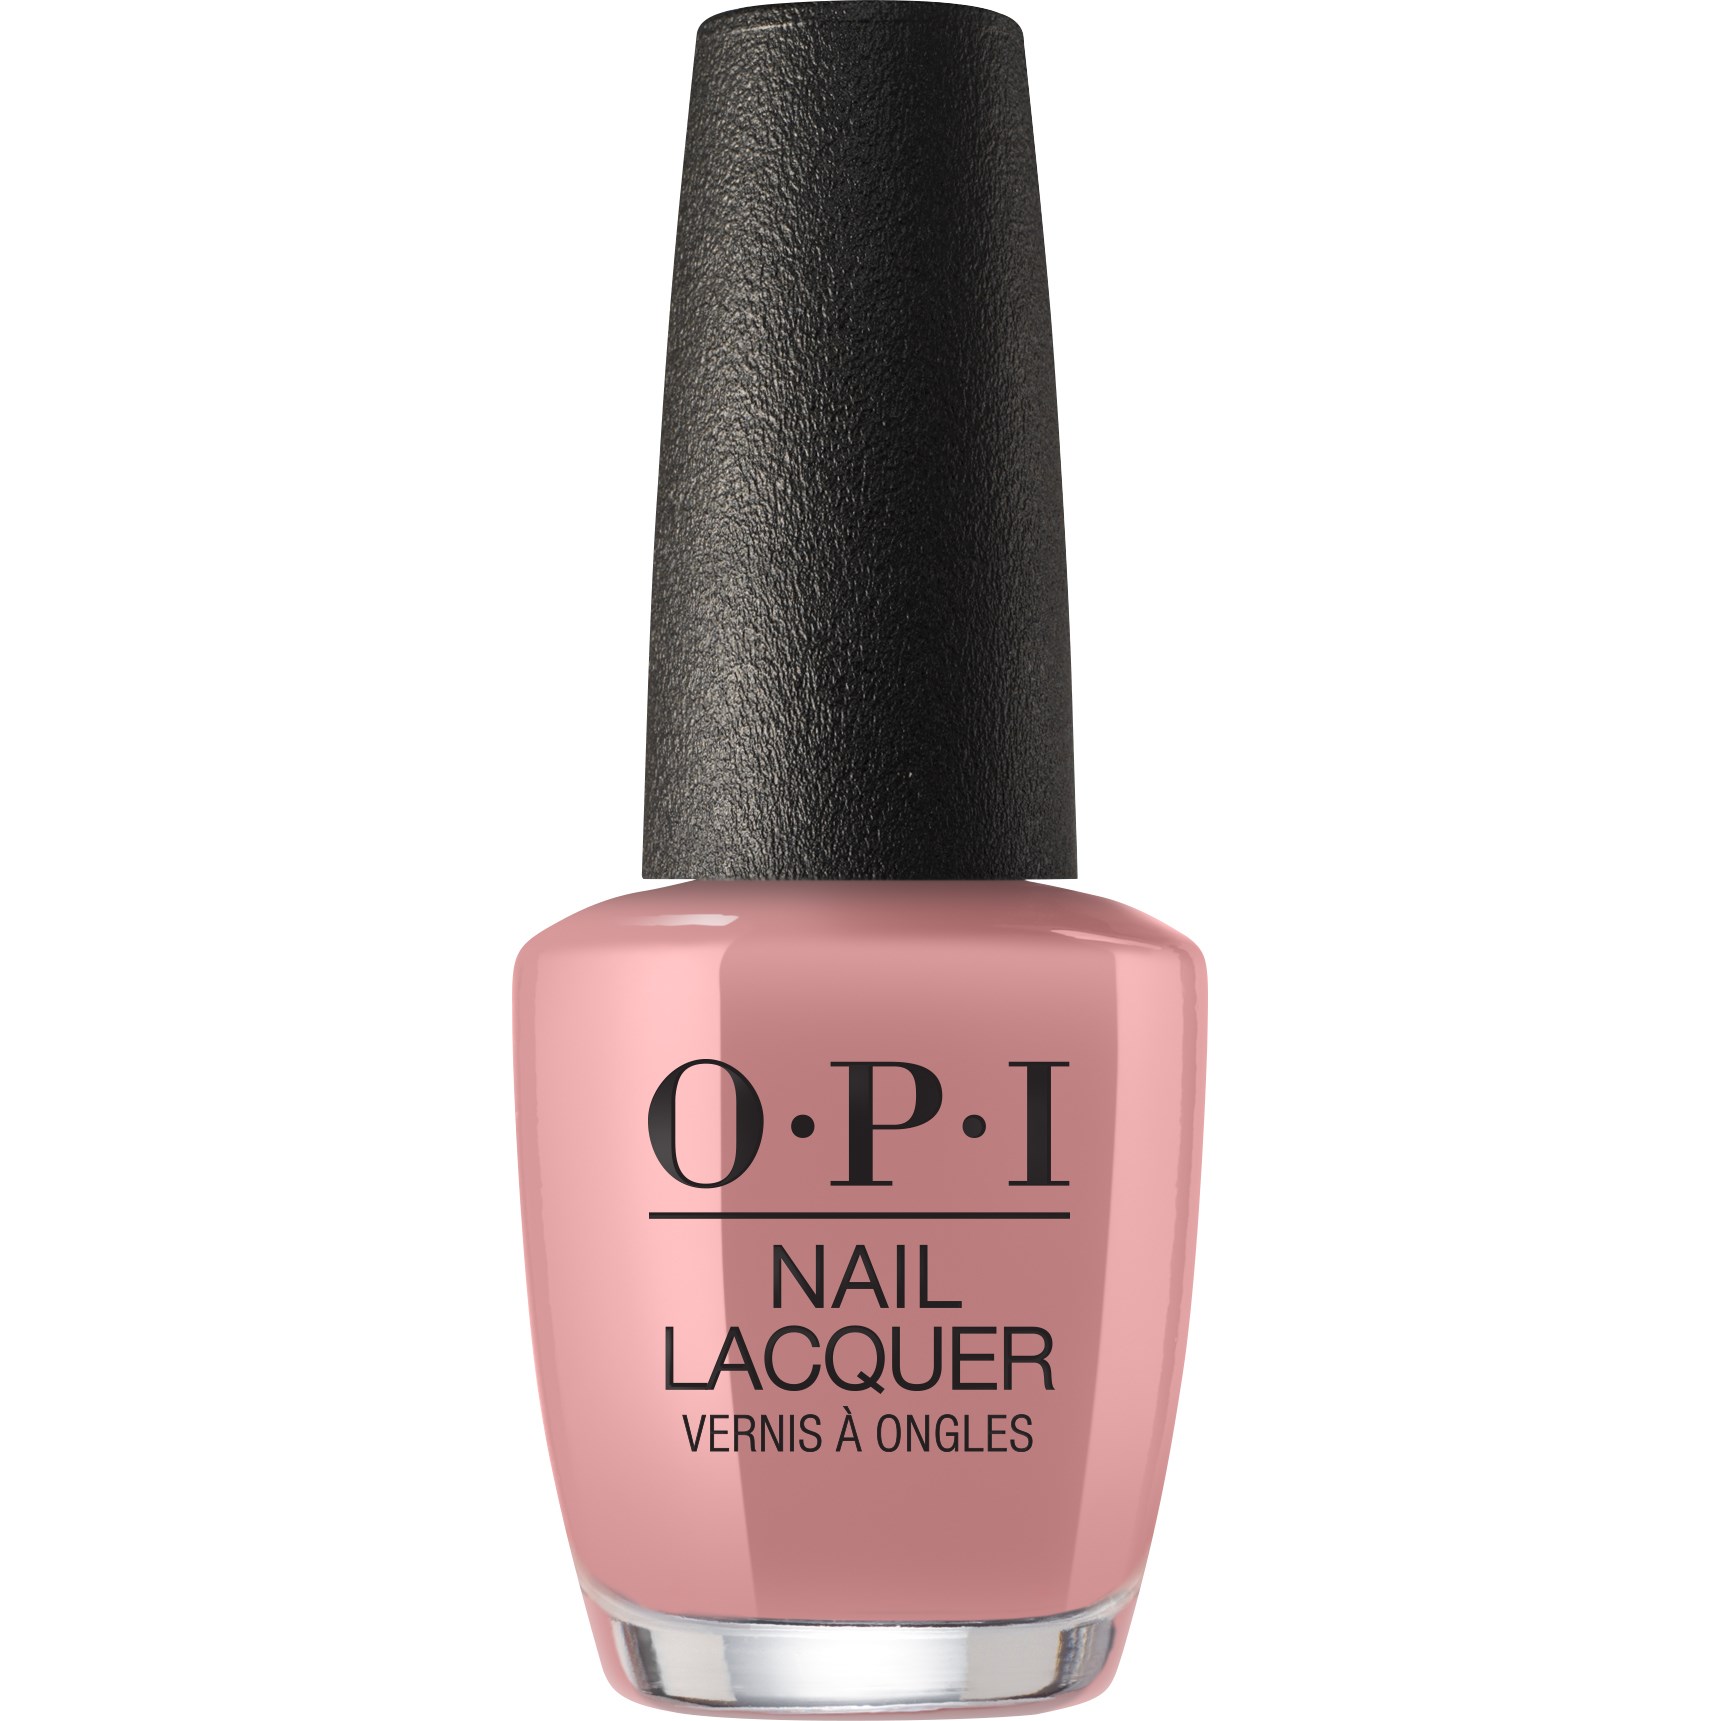 OPI Nail Lacquer Peru Somewhere Over the Rainbow Mountains